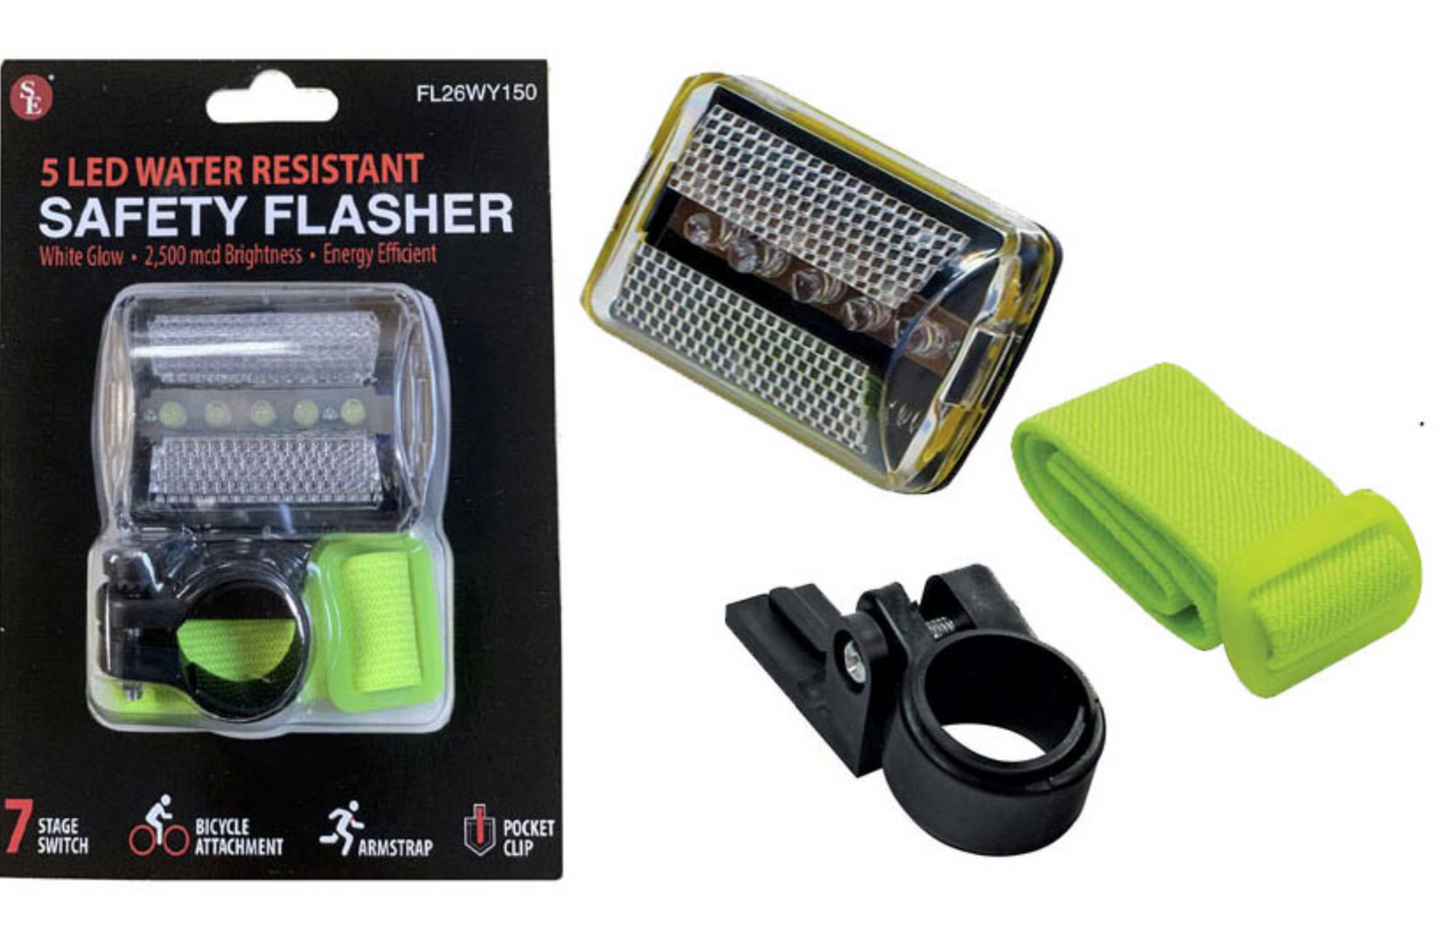 5 LED WATER RESISTANT SAFETY FLASHER